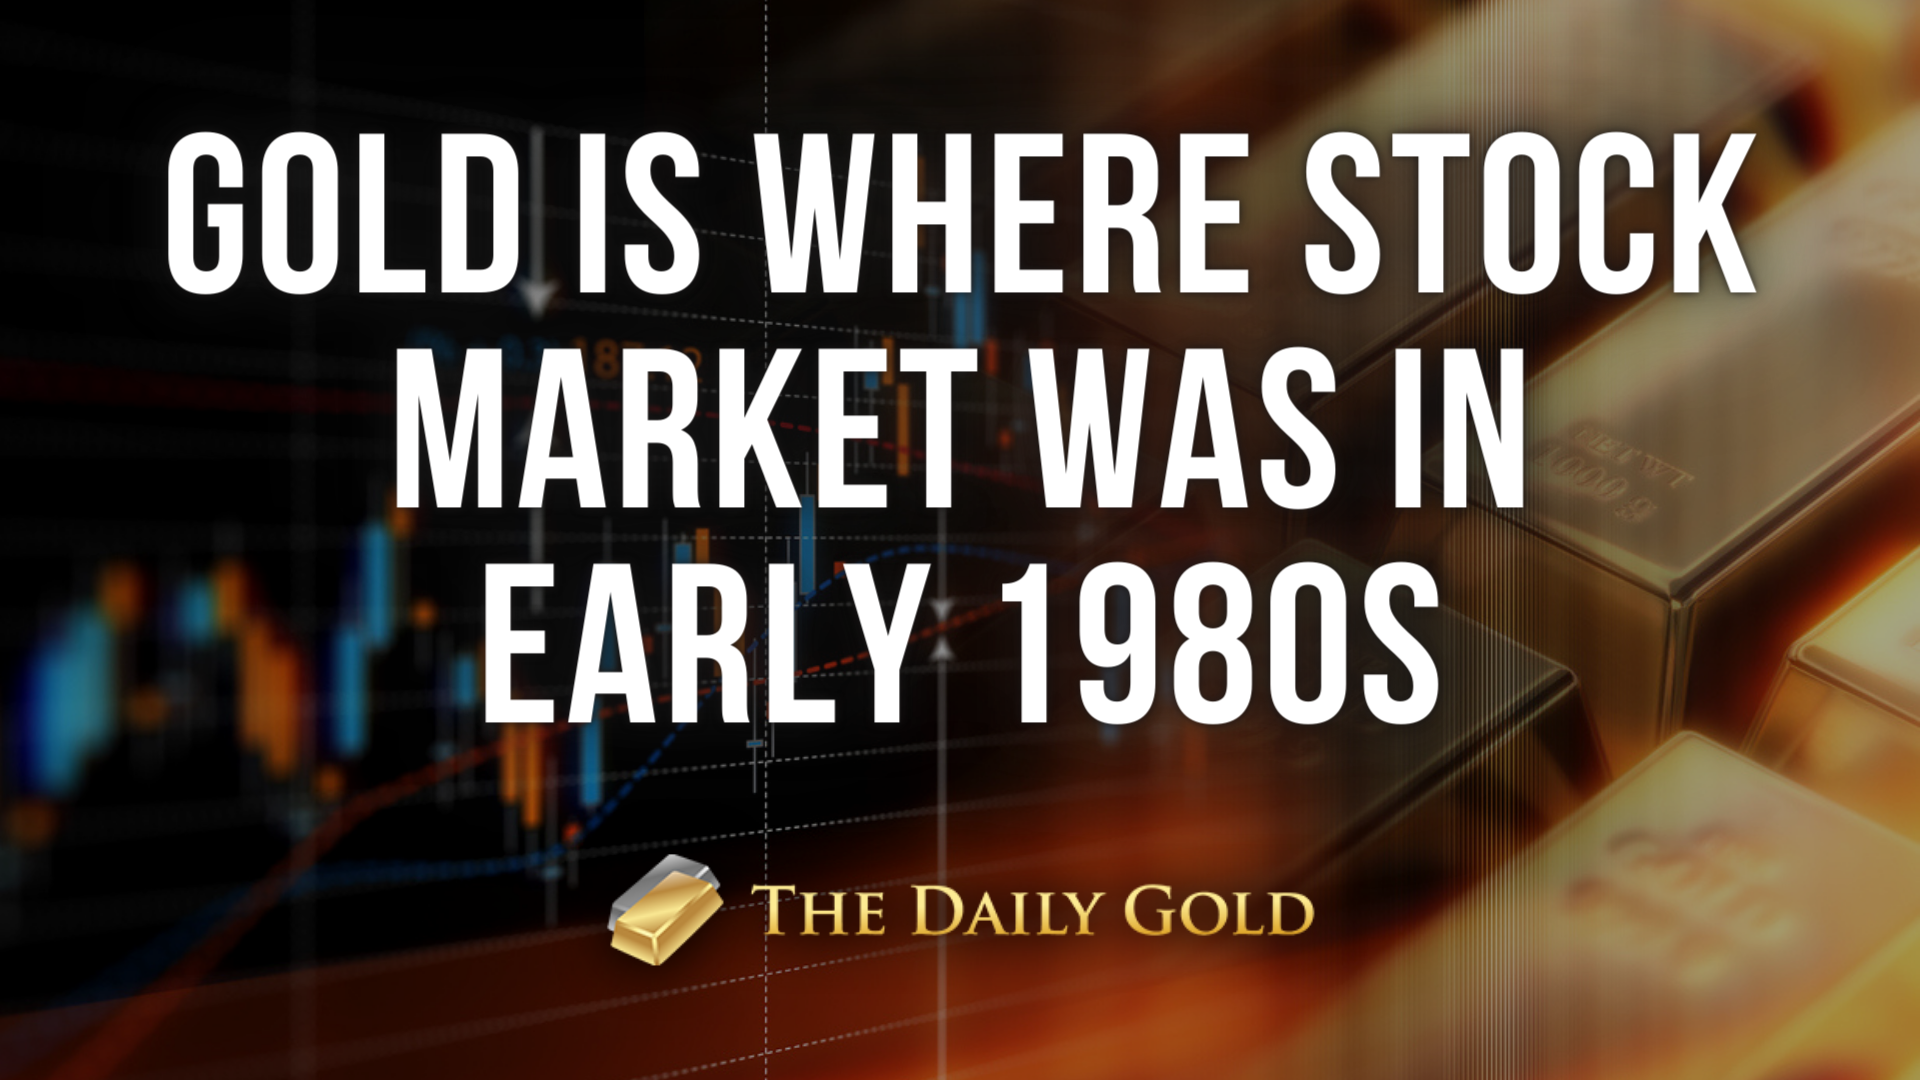 Gold is Where Stock Market was in Early 1980s